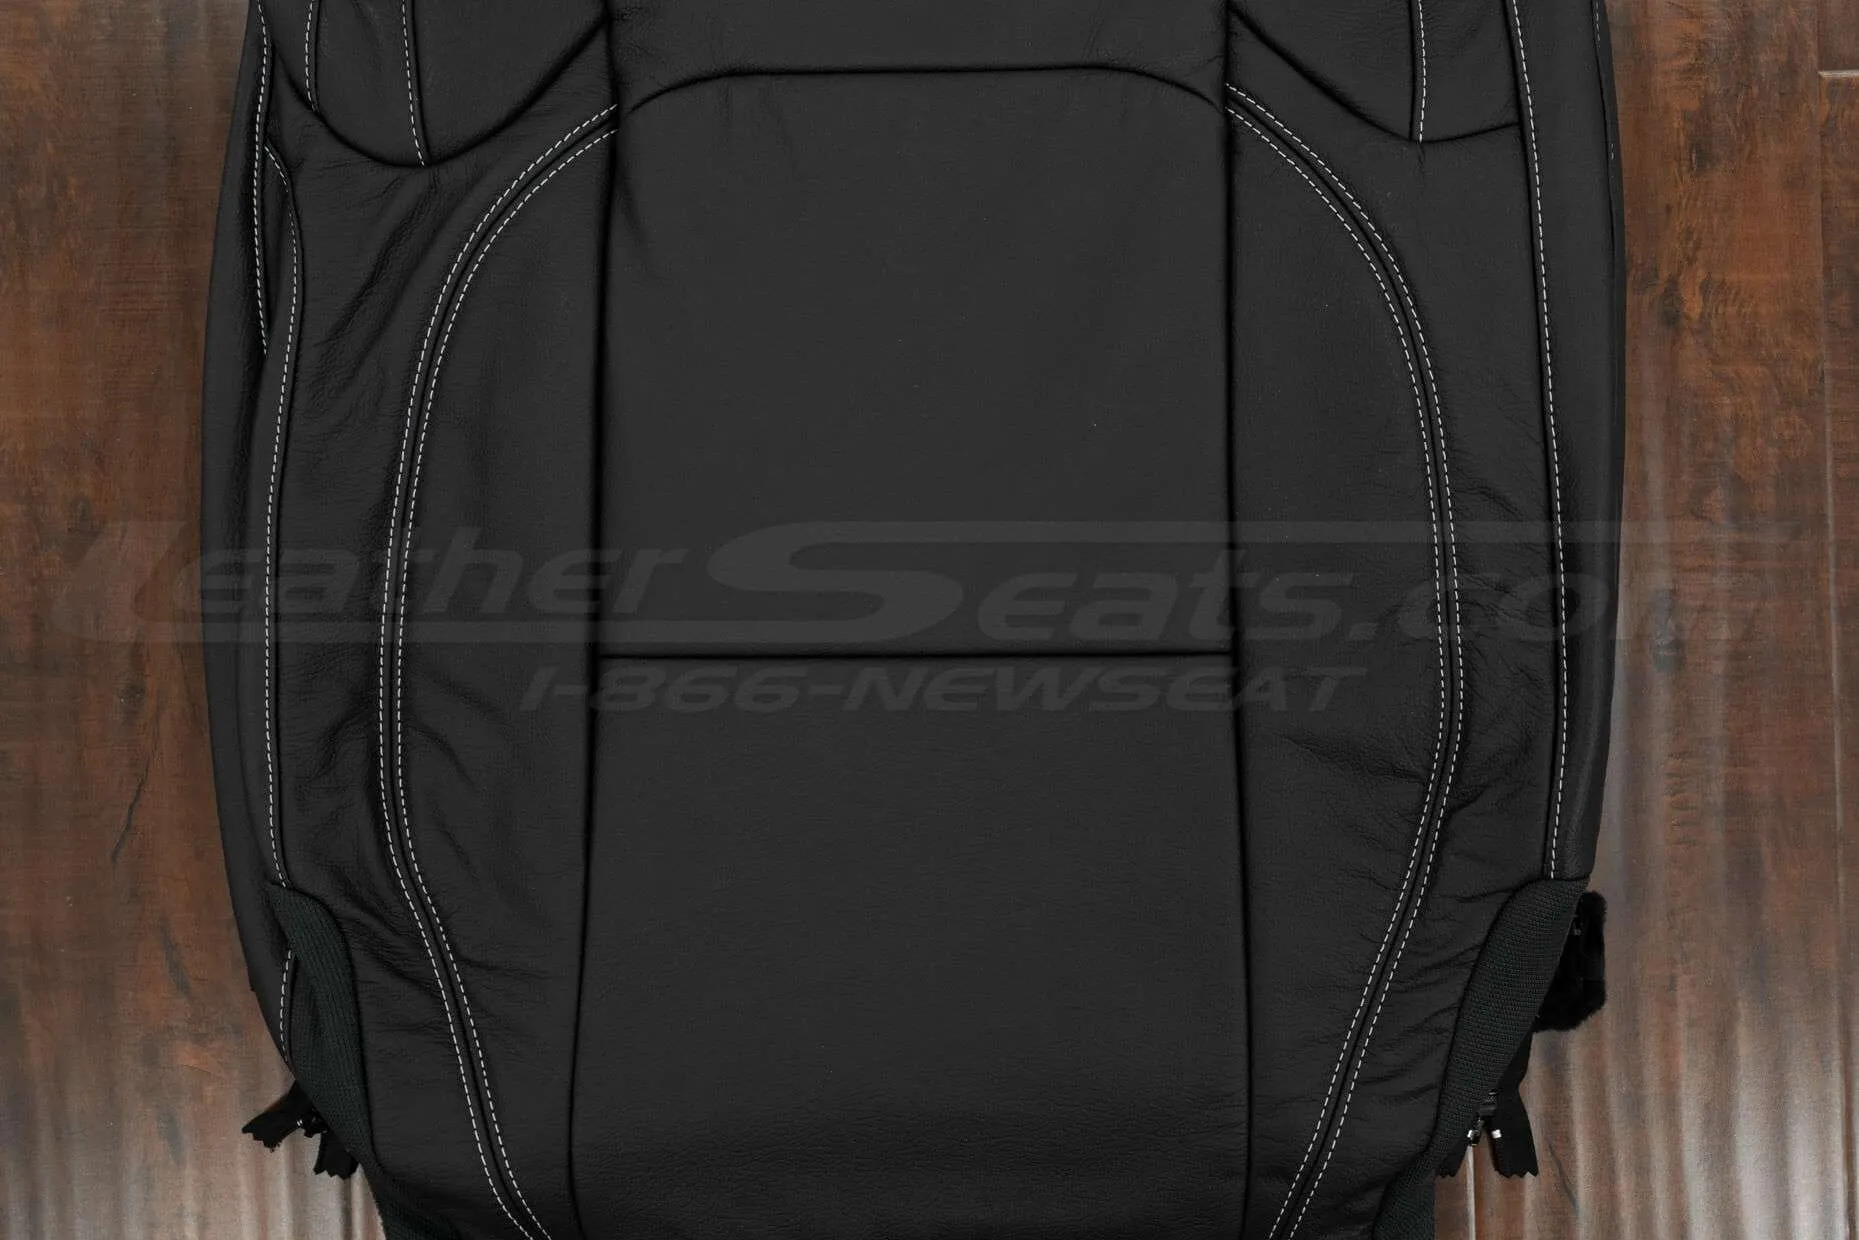 Insert section of backrest with ice grey stitching